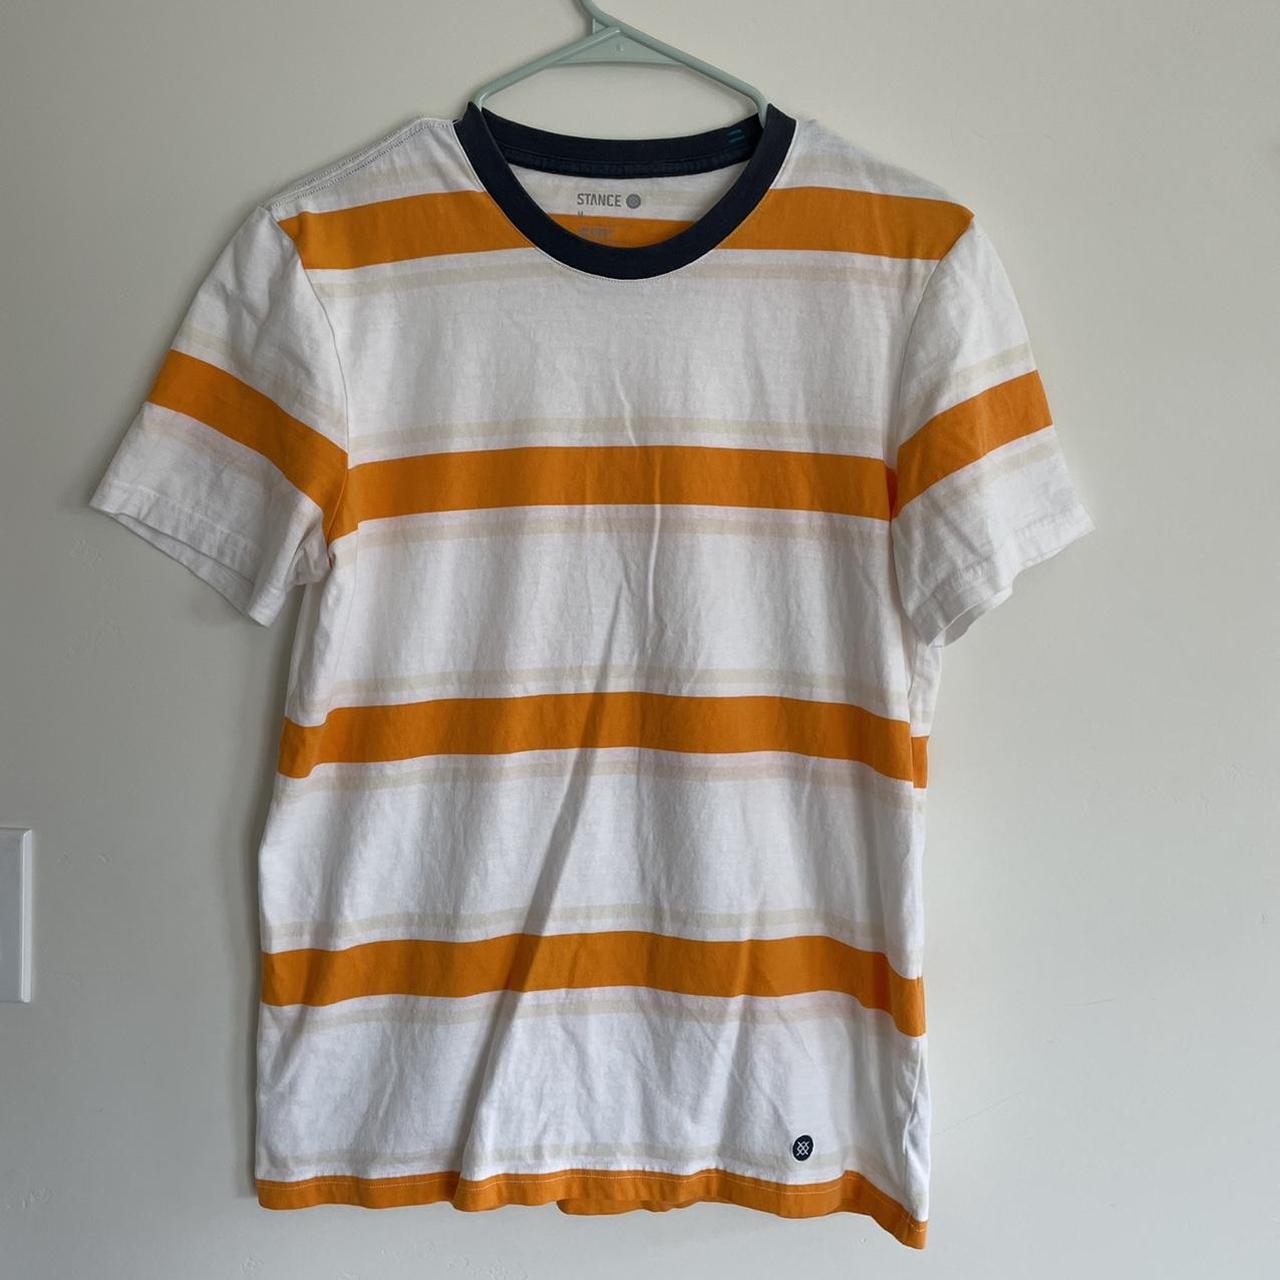 Product Image 2 - Orange and white striped Stance